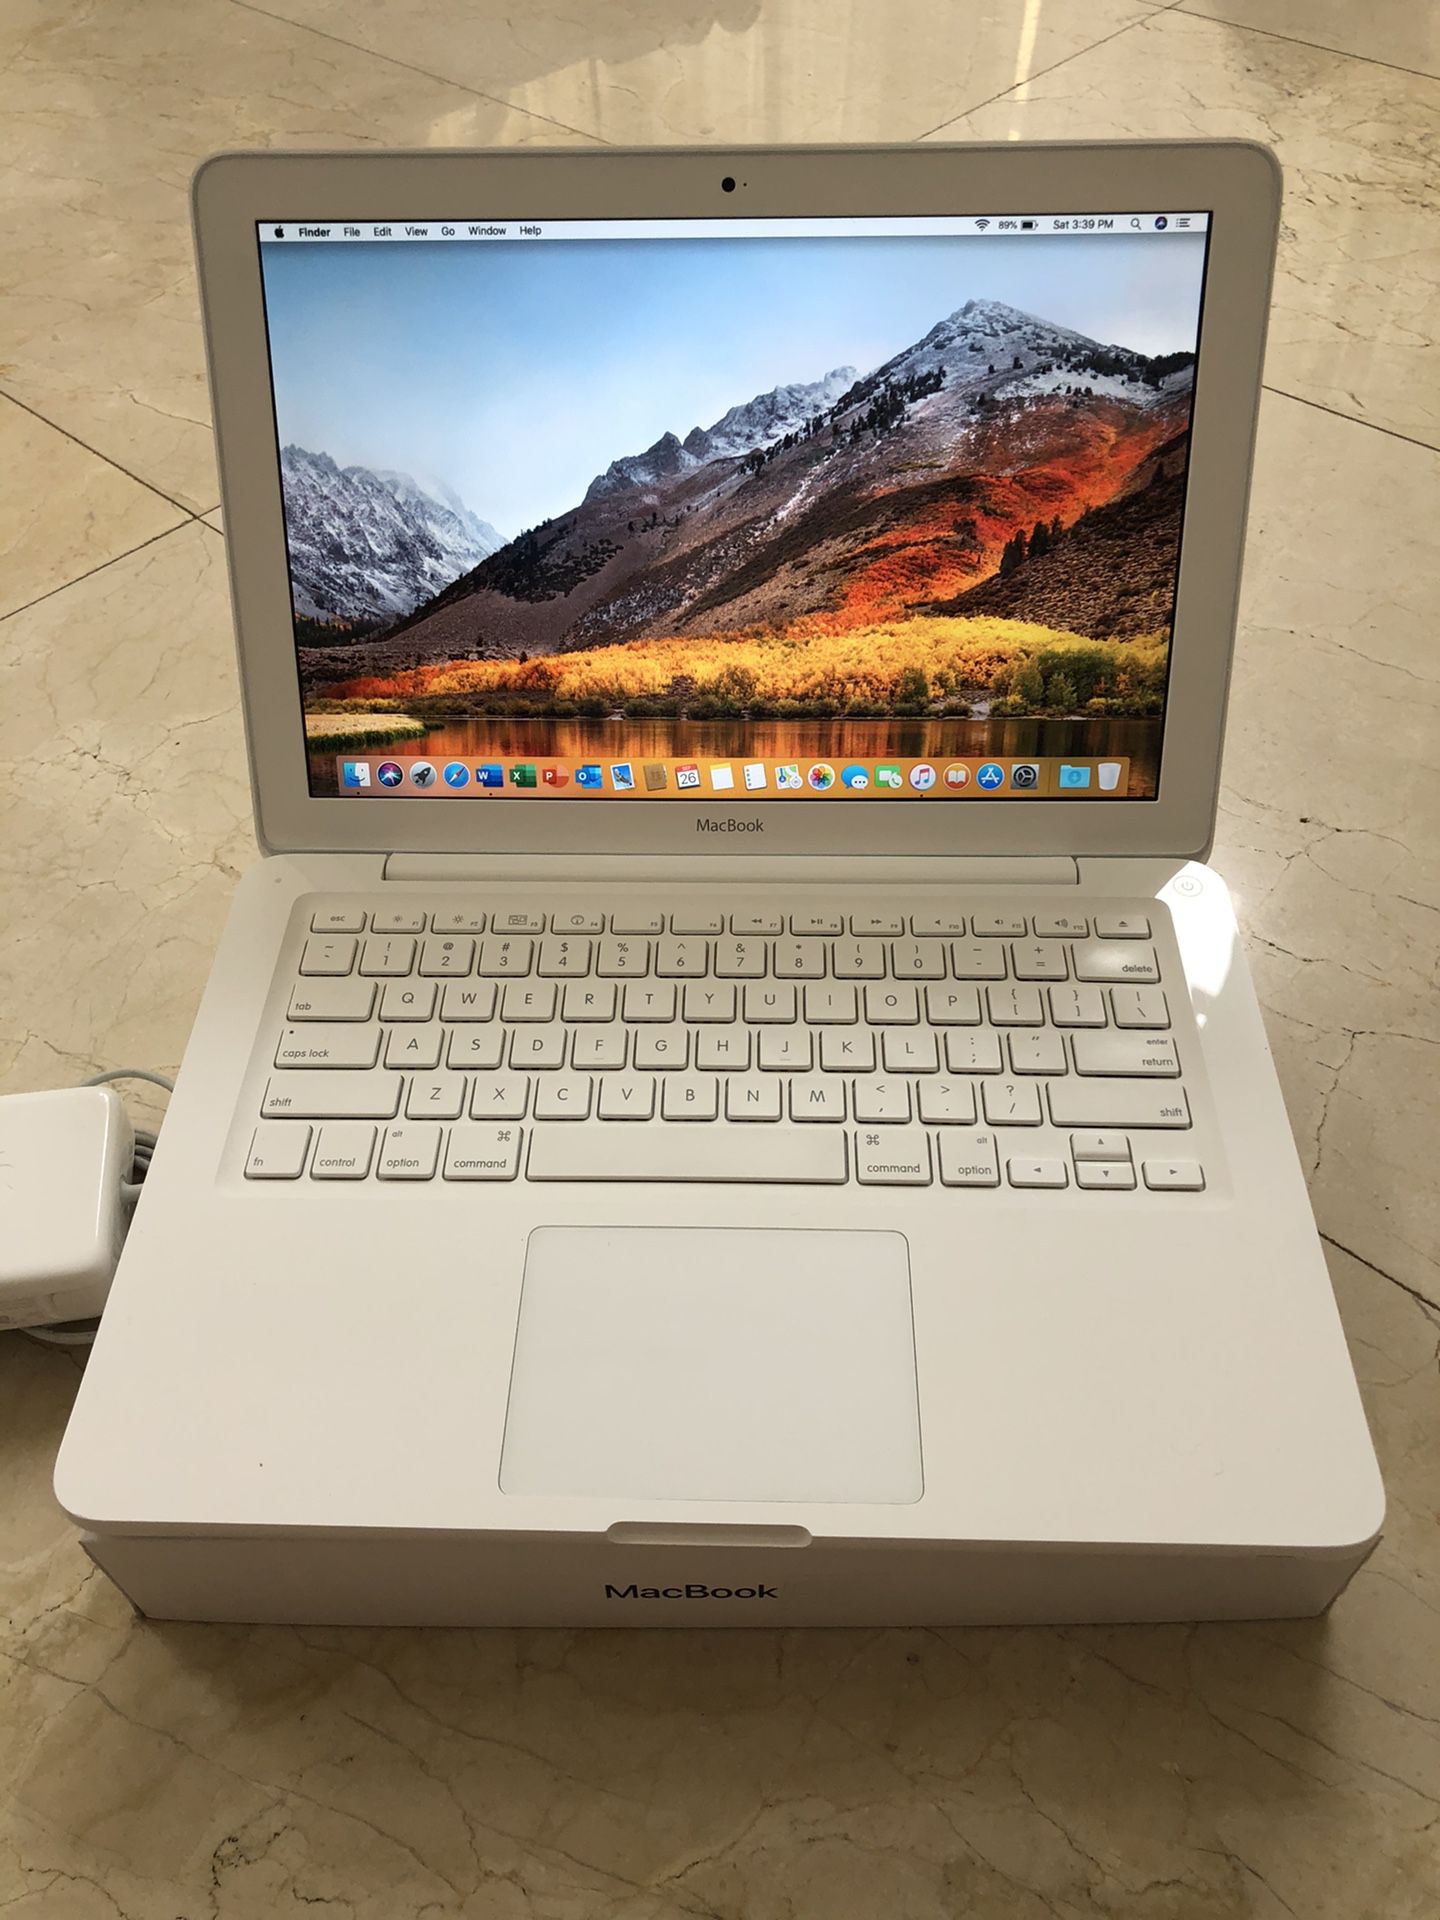 White Apple MacBook laptop A1342 Core2 Duo 2.4GHz 4GB RAM 120GB SSD macOS High Sierra. Comes with Office Pro 2019 installed